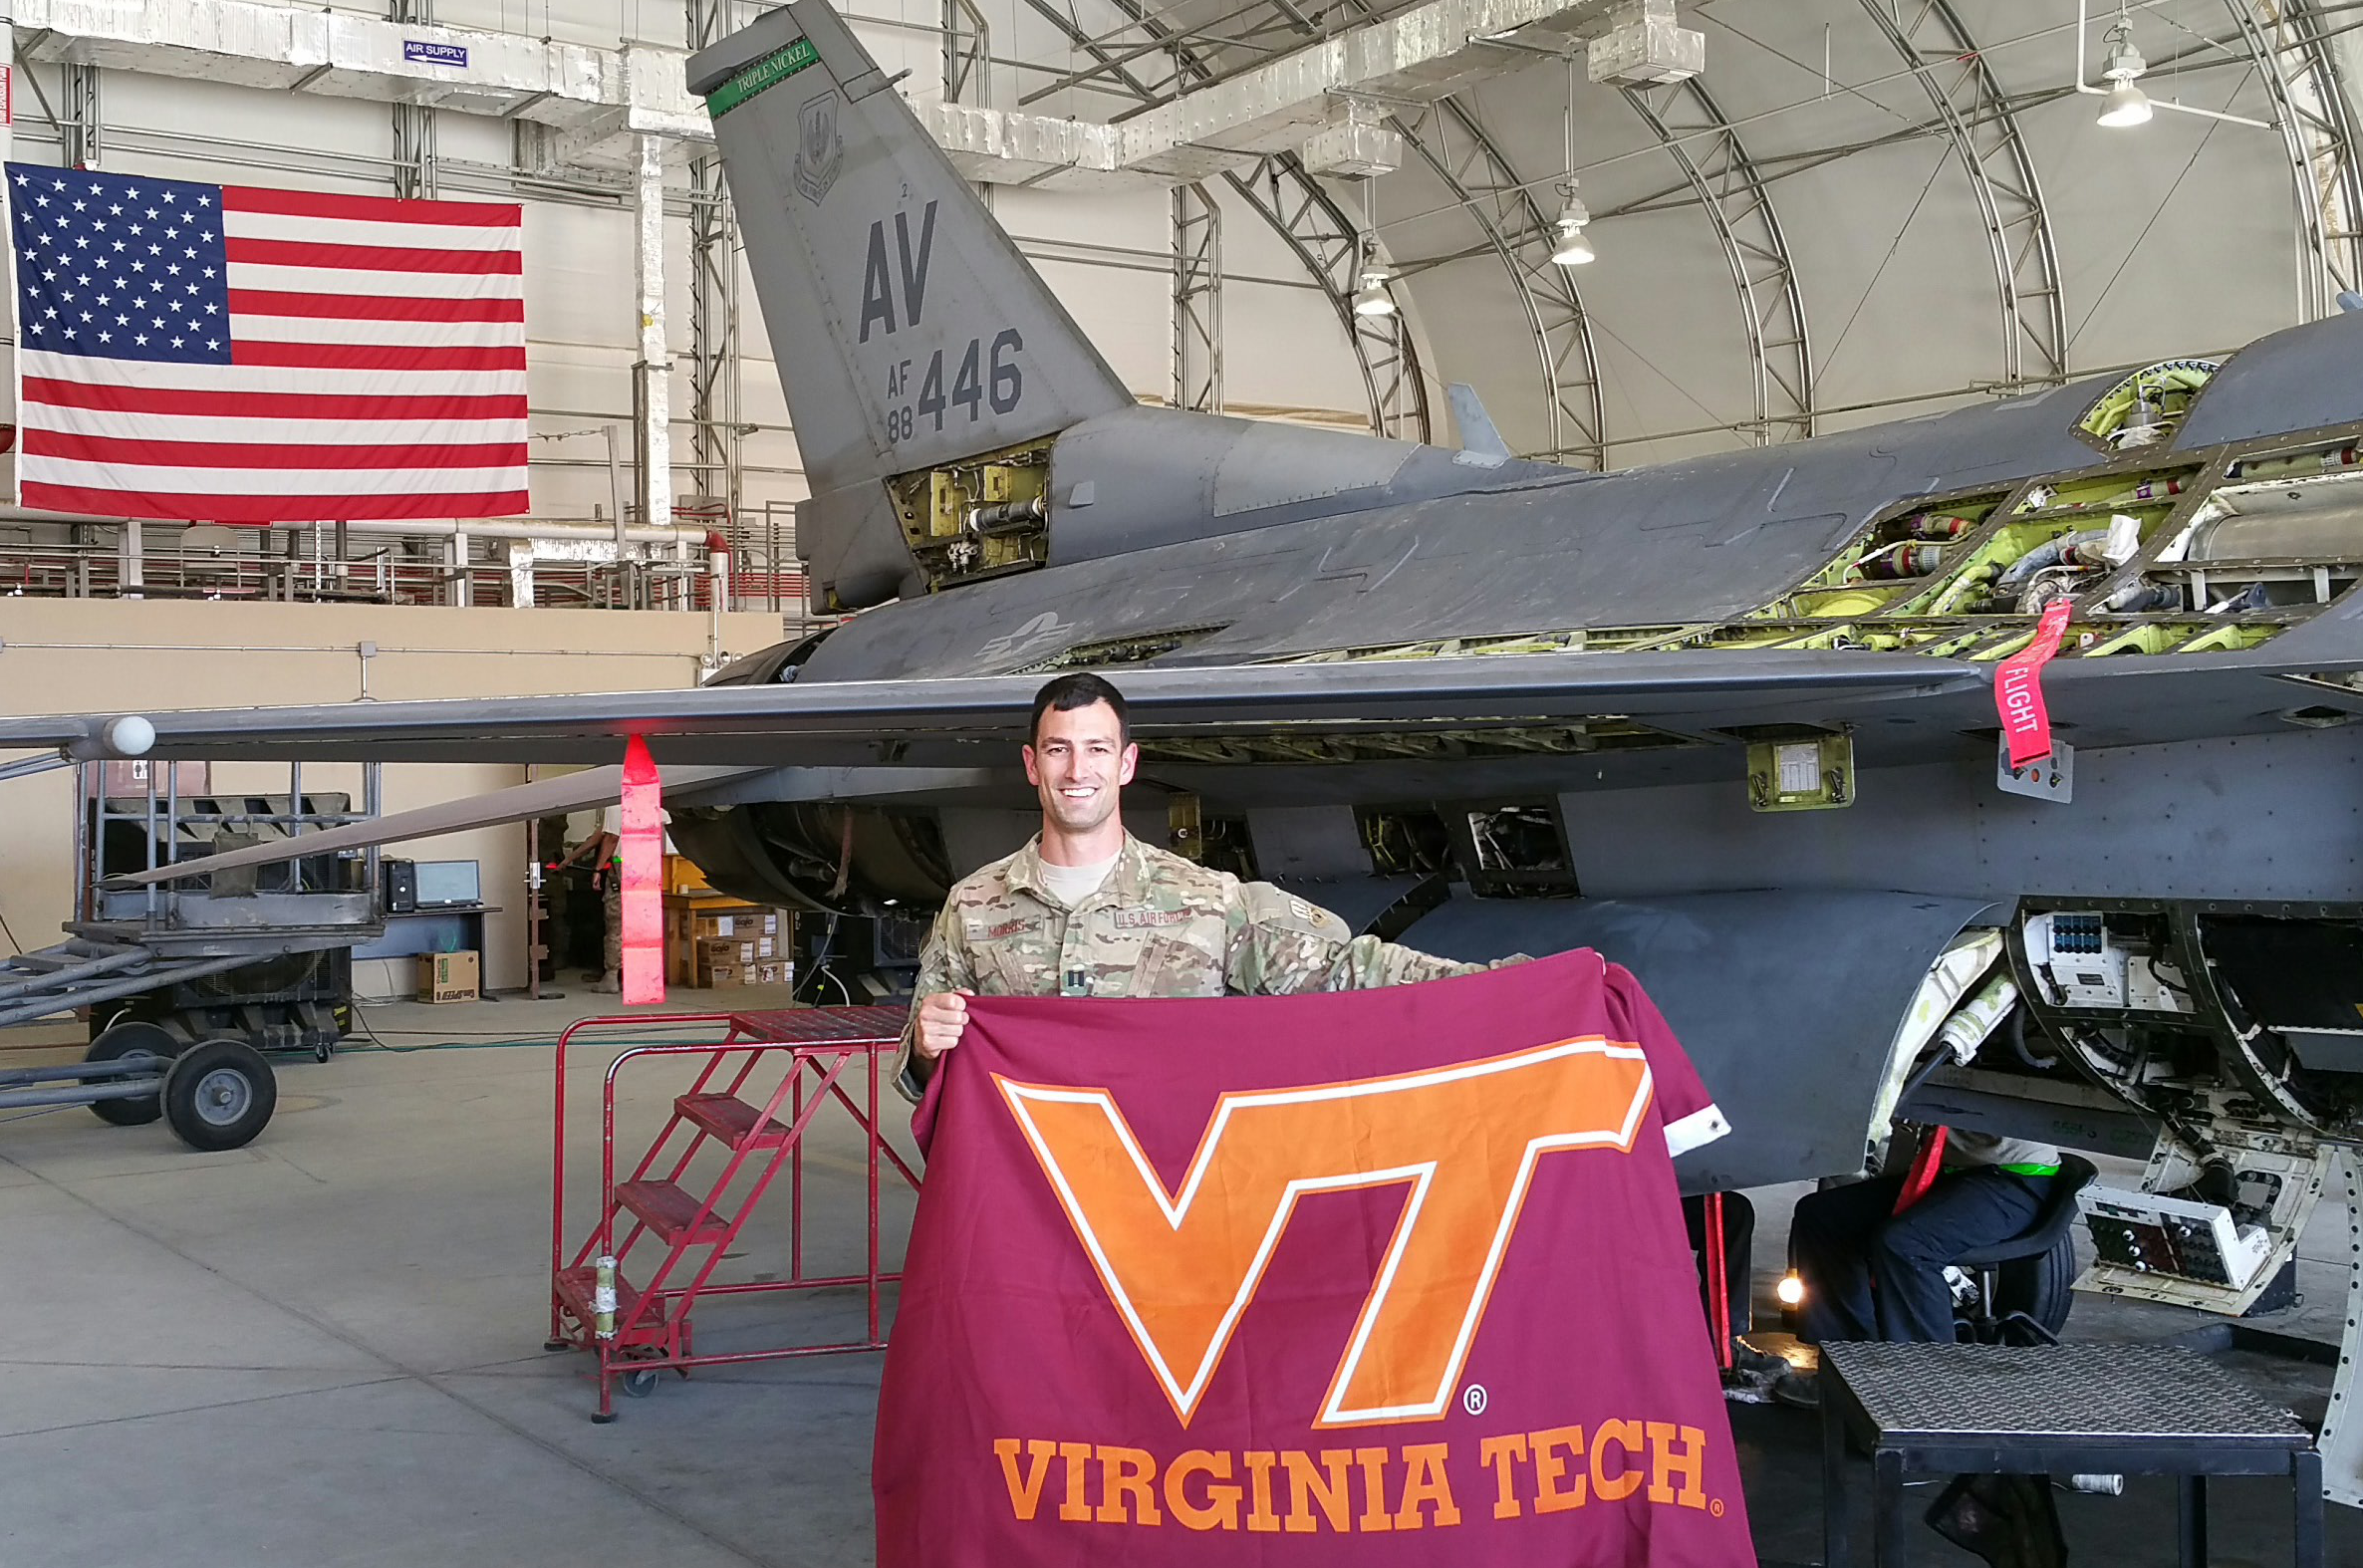 Capt. Ryan Morris, U.S. Air Force, Virginia Tech Corps of Cadets Class of 2009 in front of an F-16.